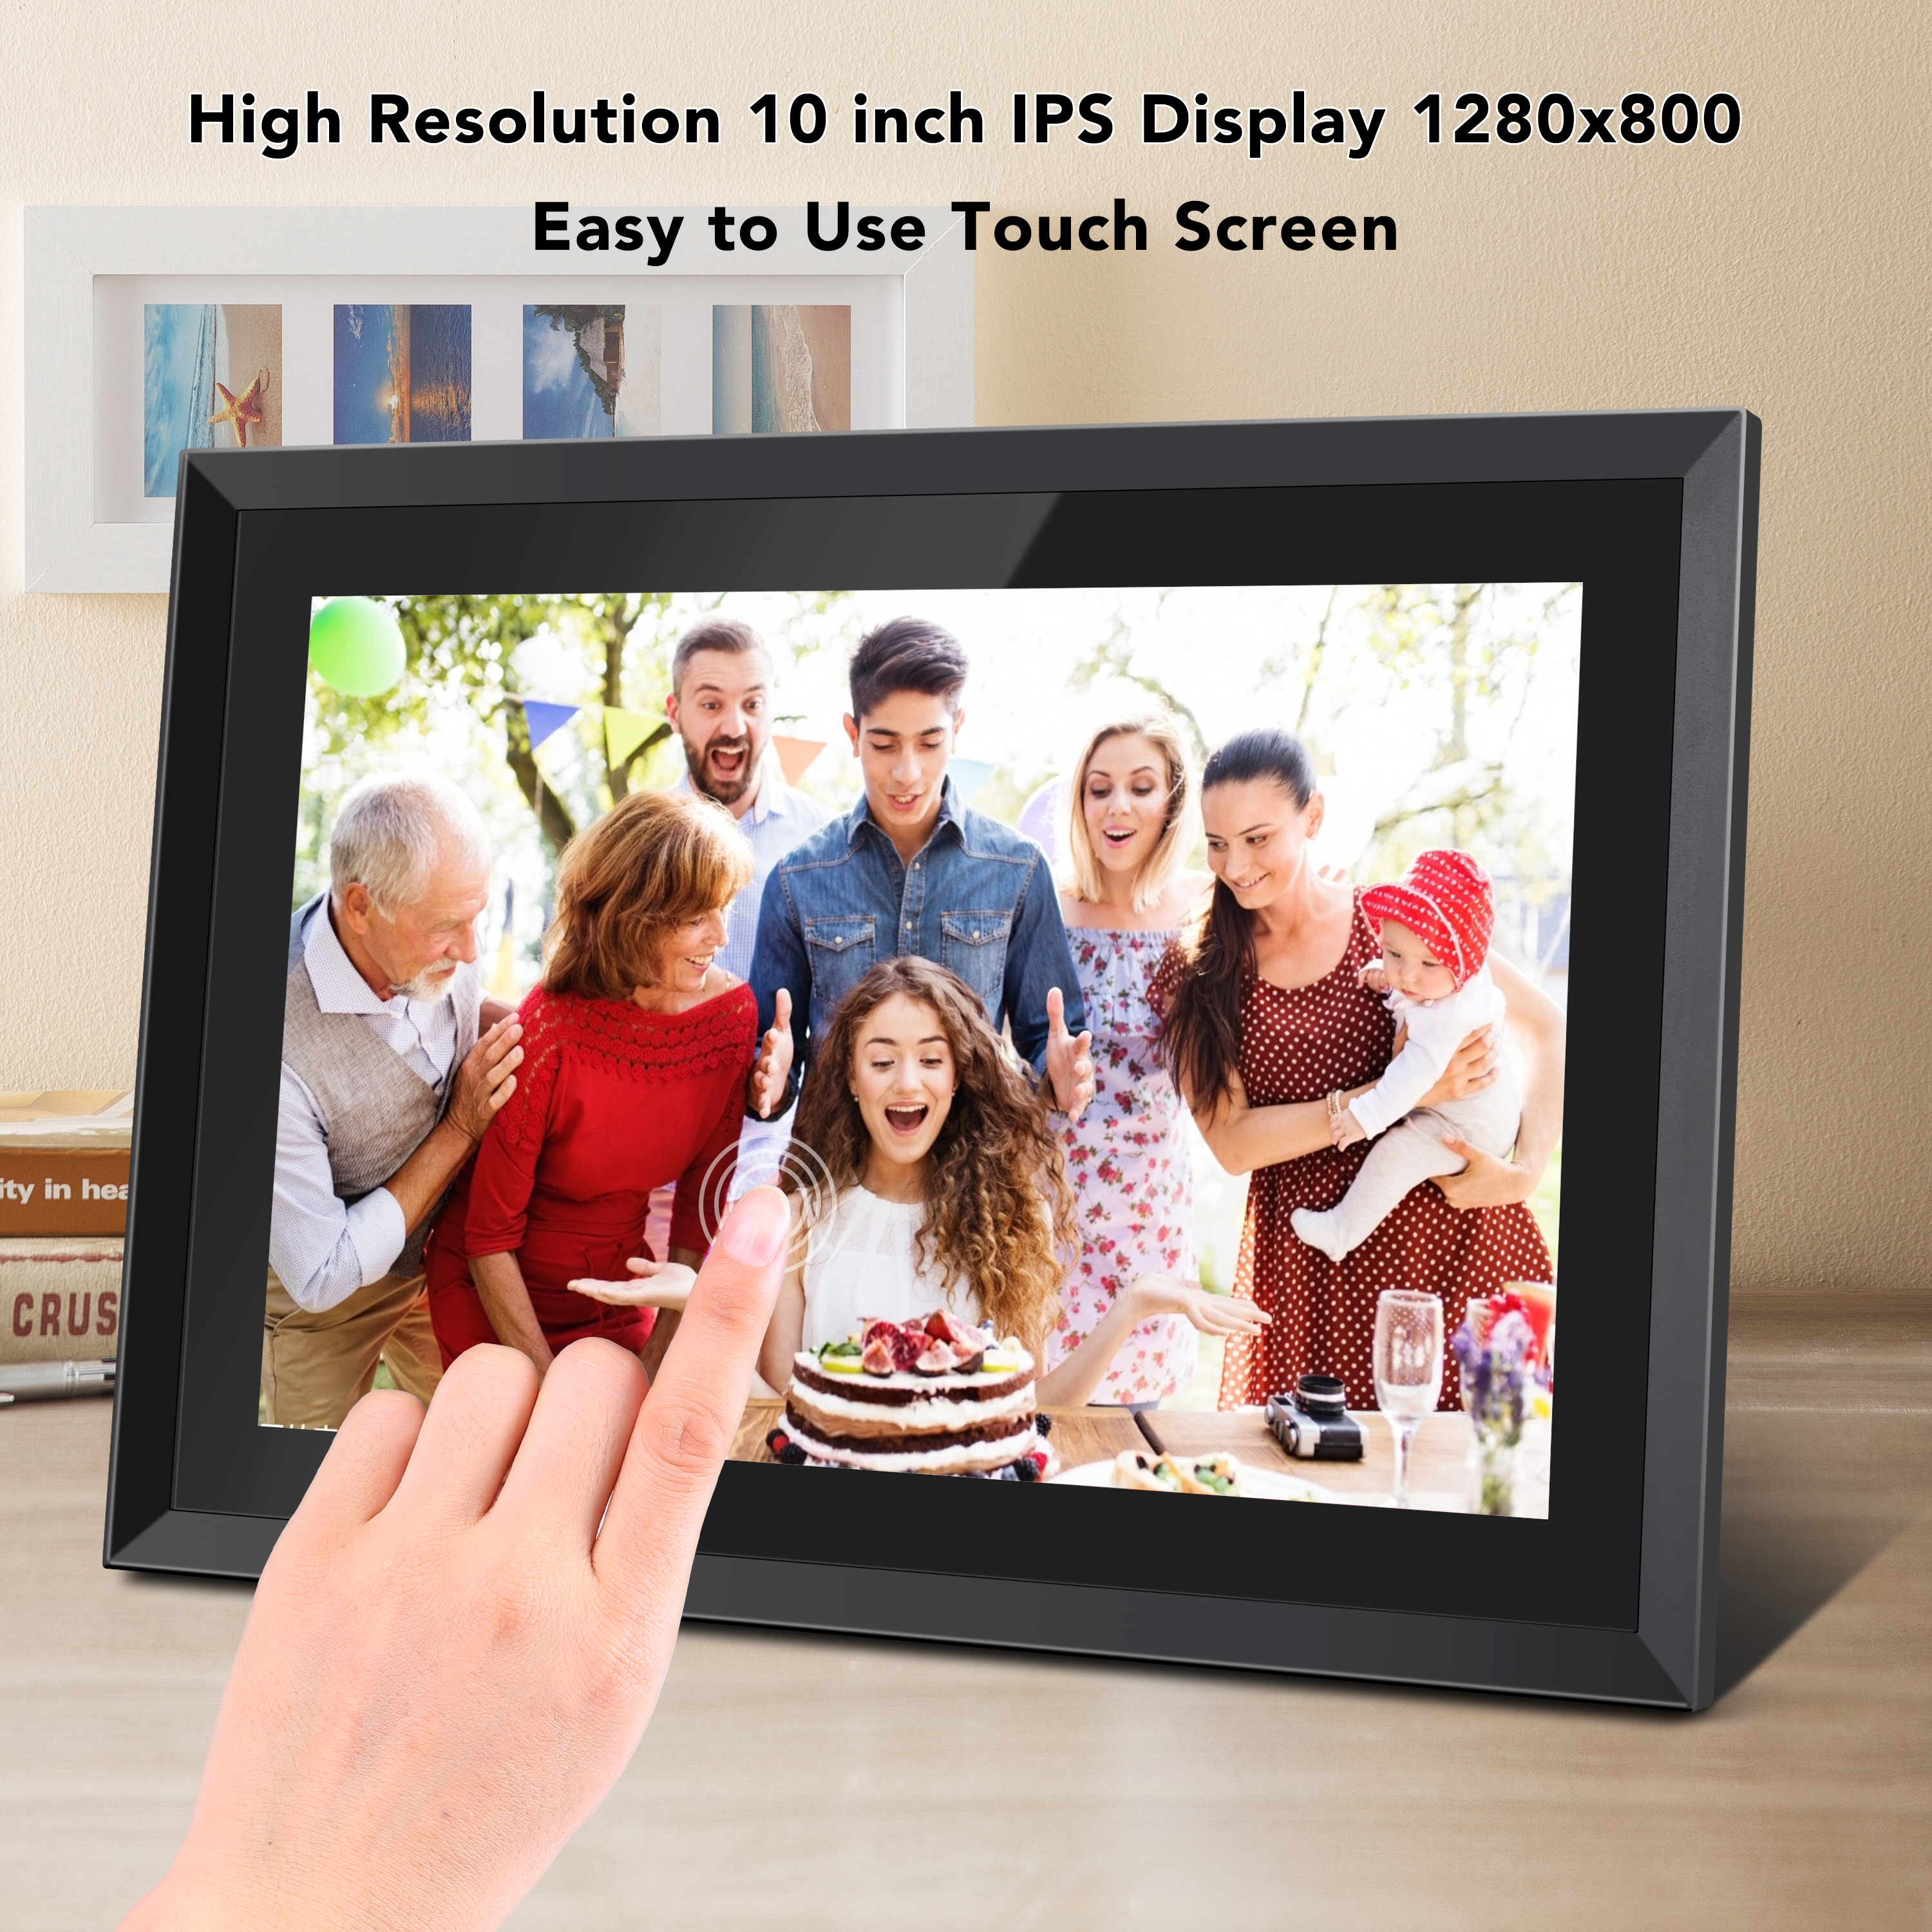 Feelcare 16GB Wifi Digital Picture Frame 10 inch, Share Moments Instantly,  IPS HD Display, Touch Screen